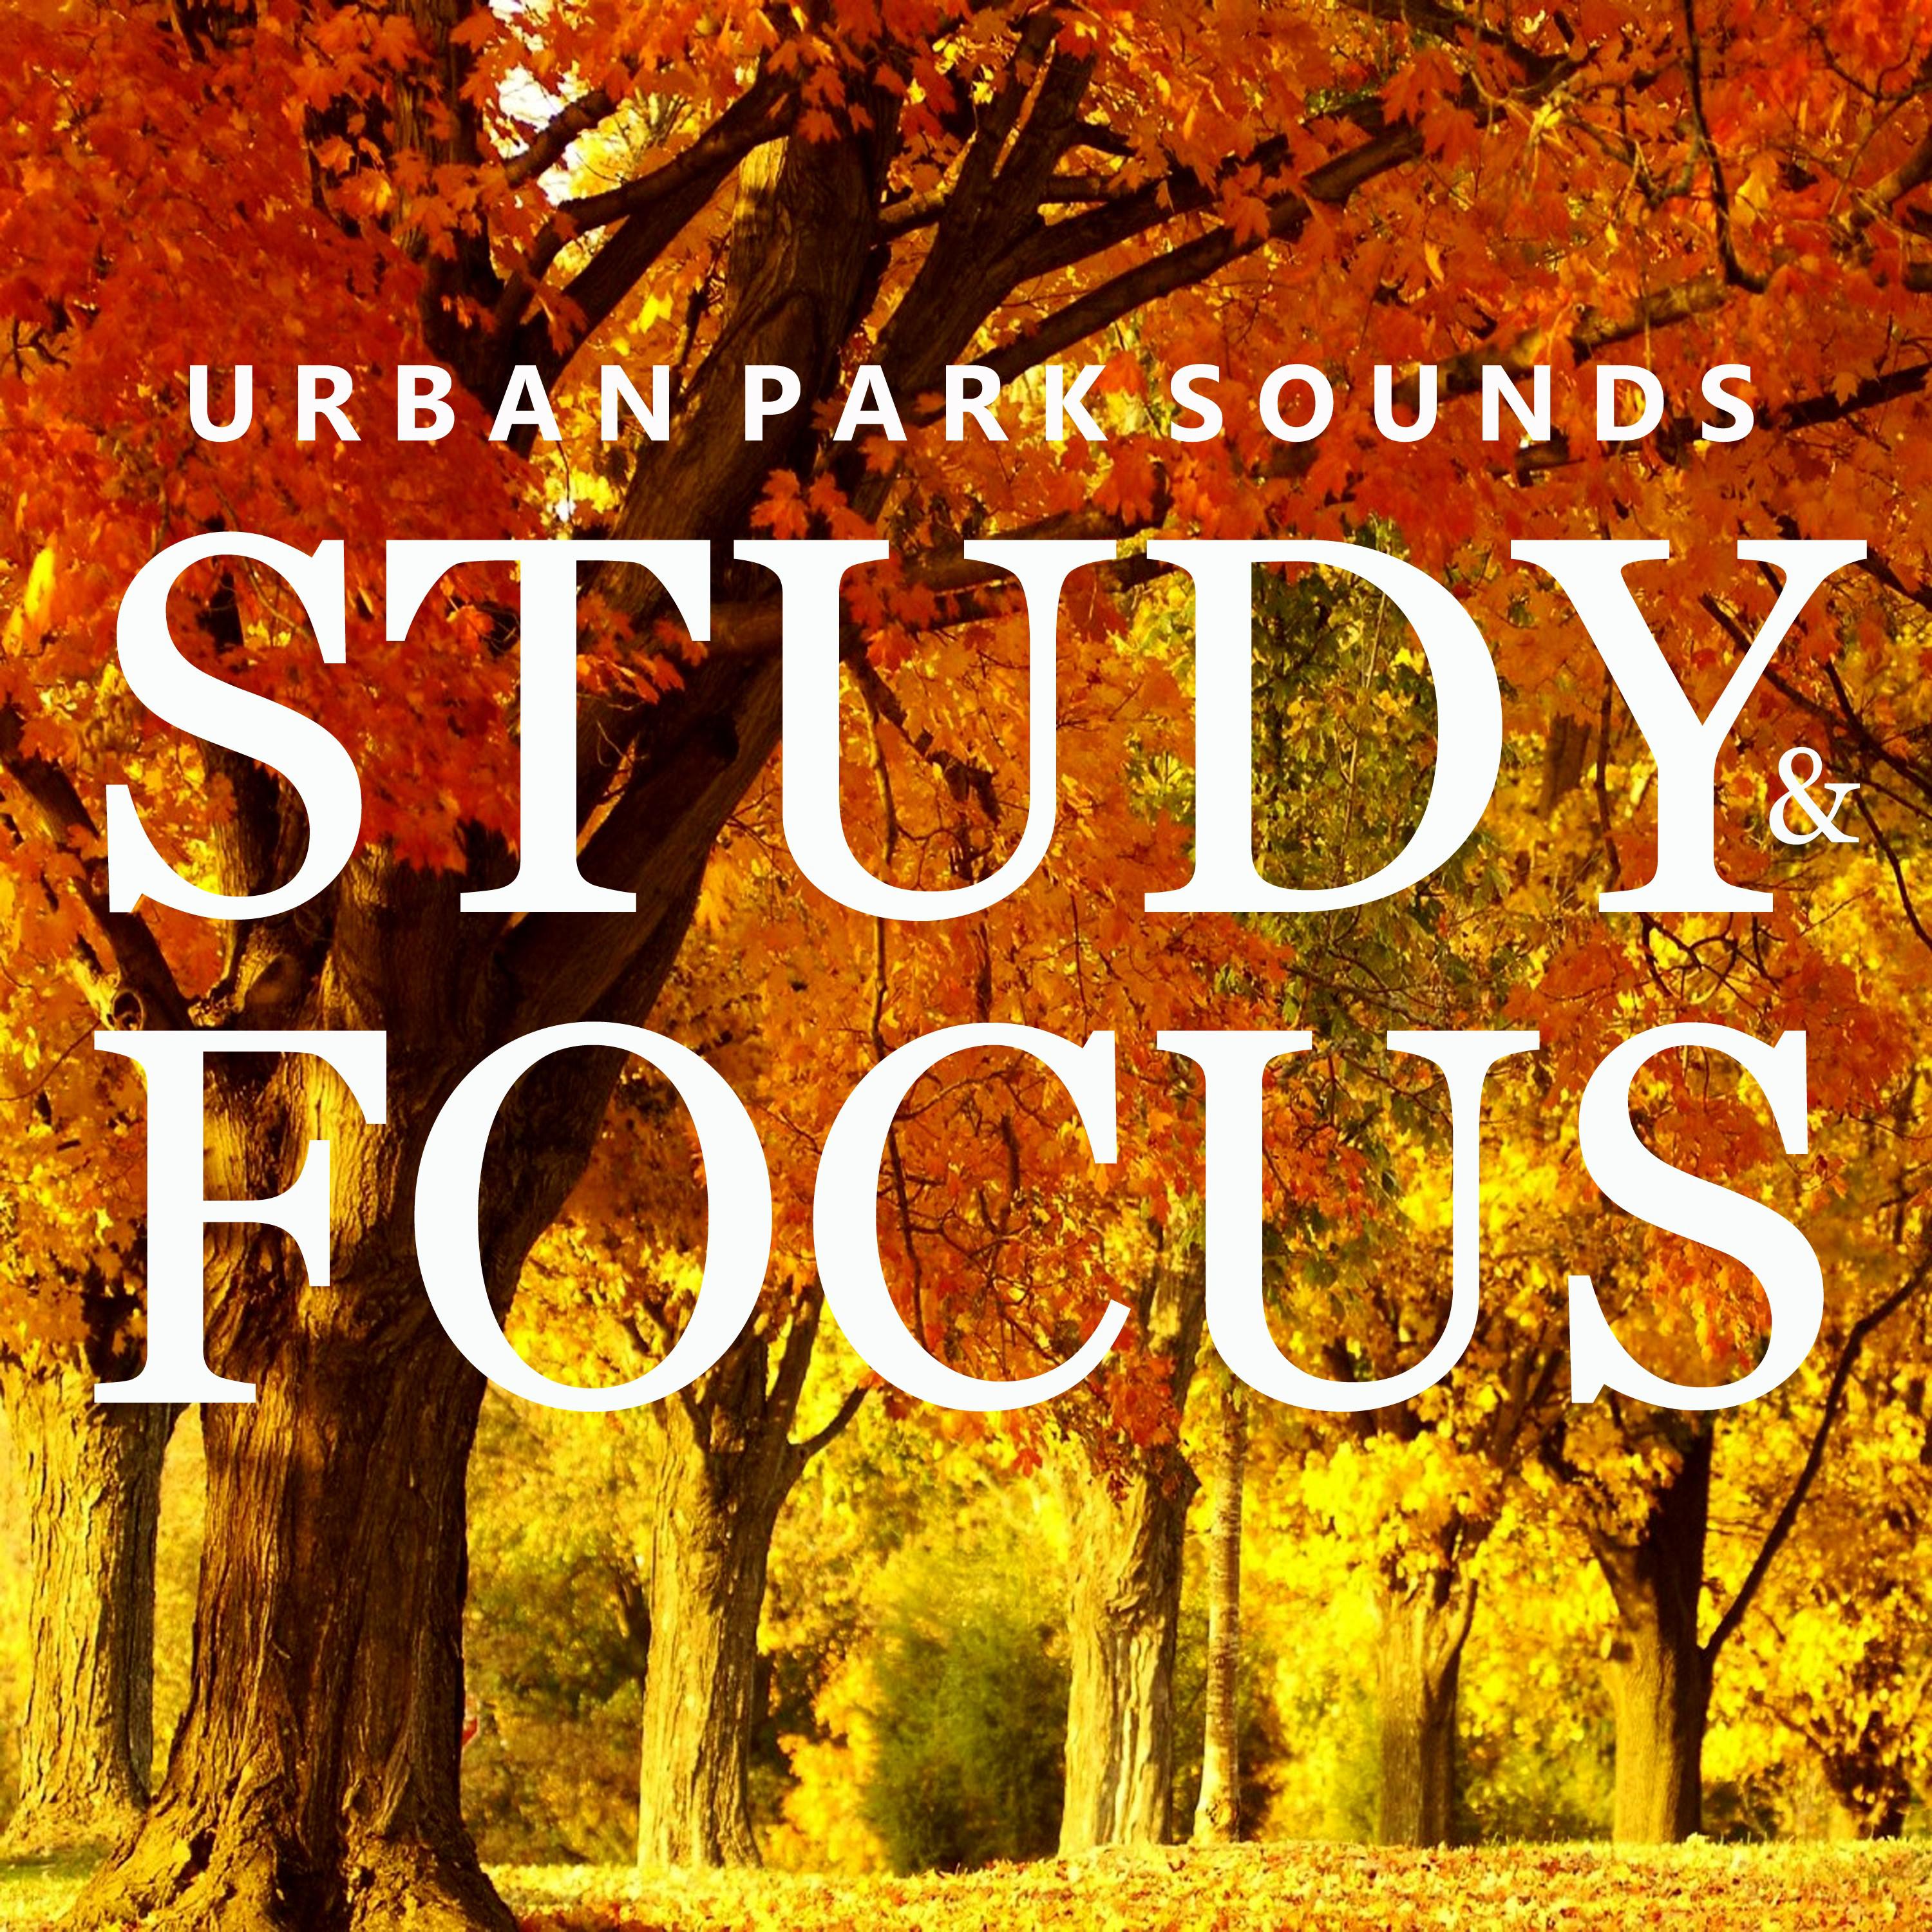 Urban Park Sounds for Studying, Pt. 35